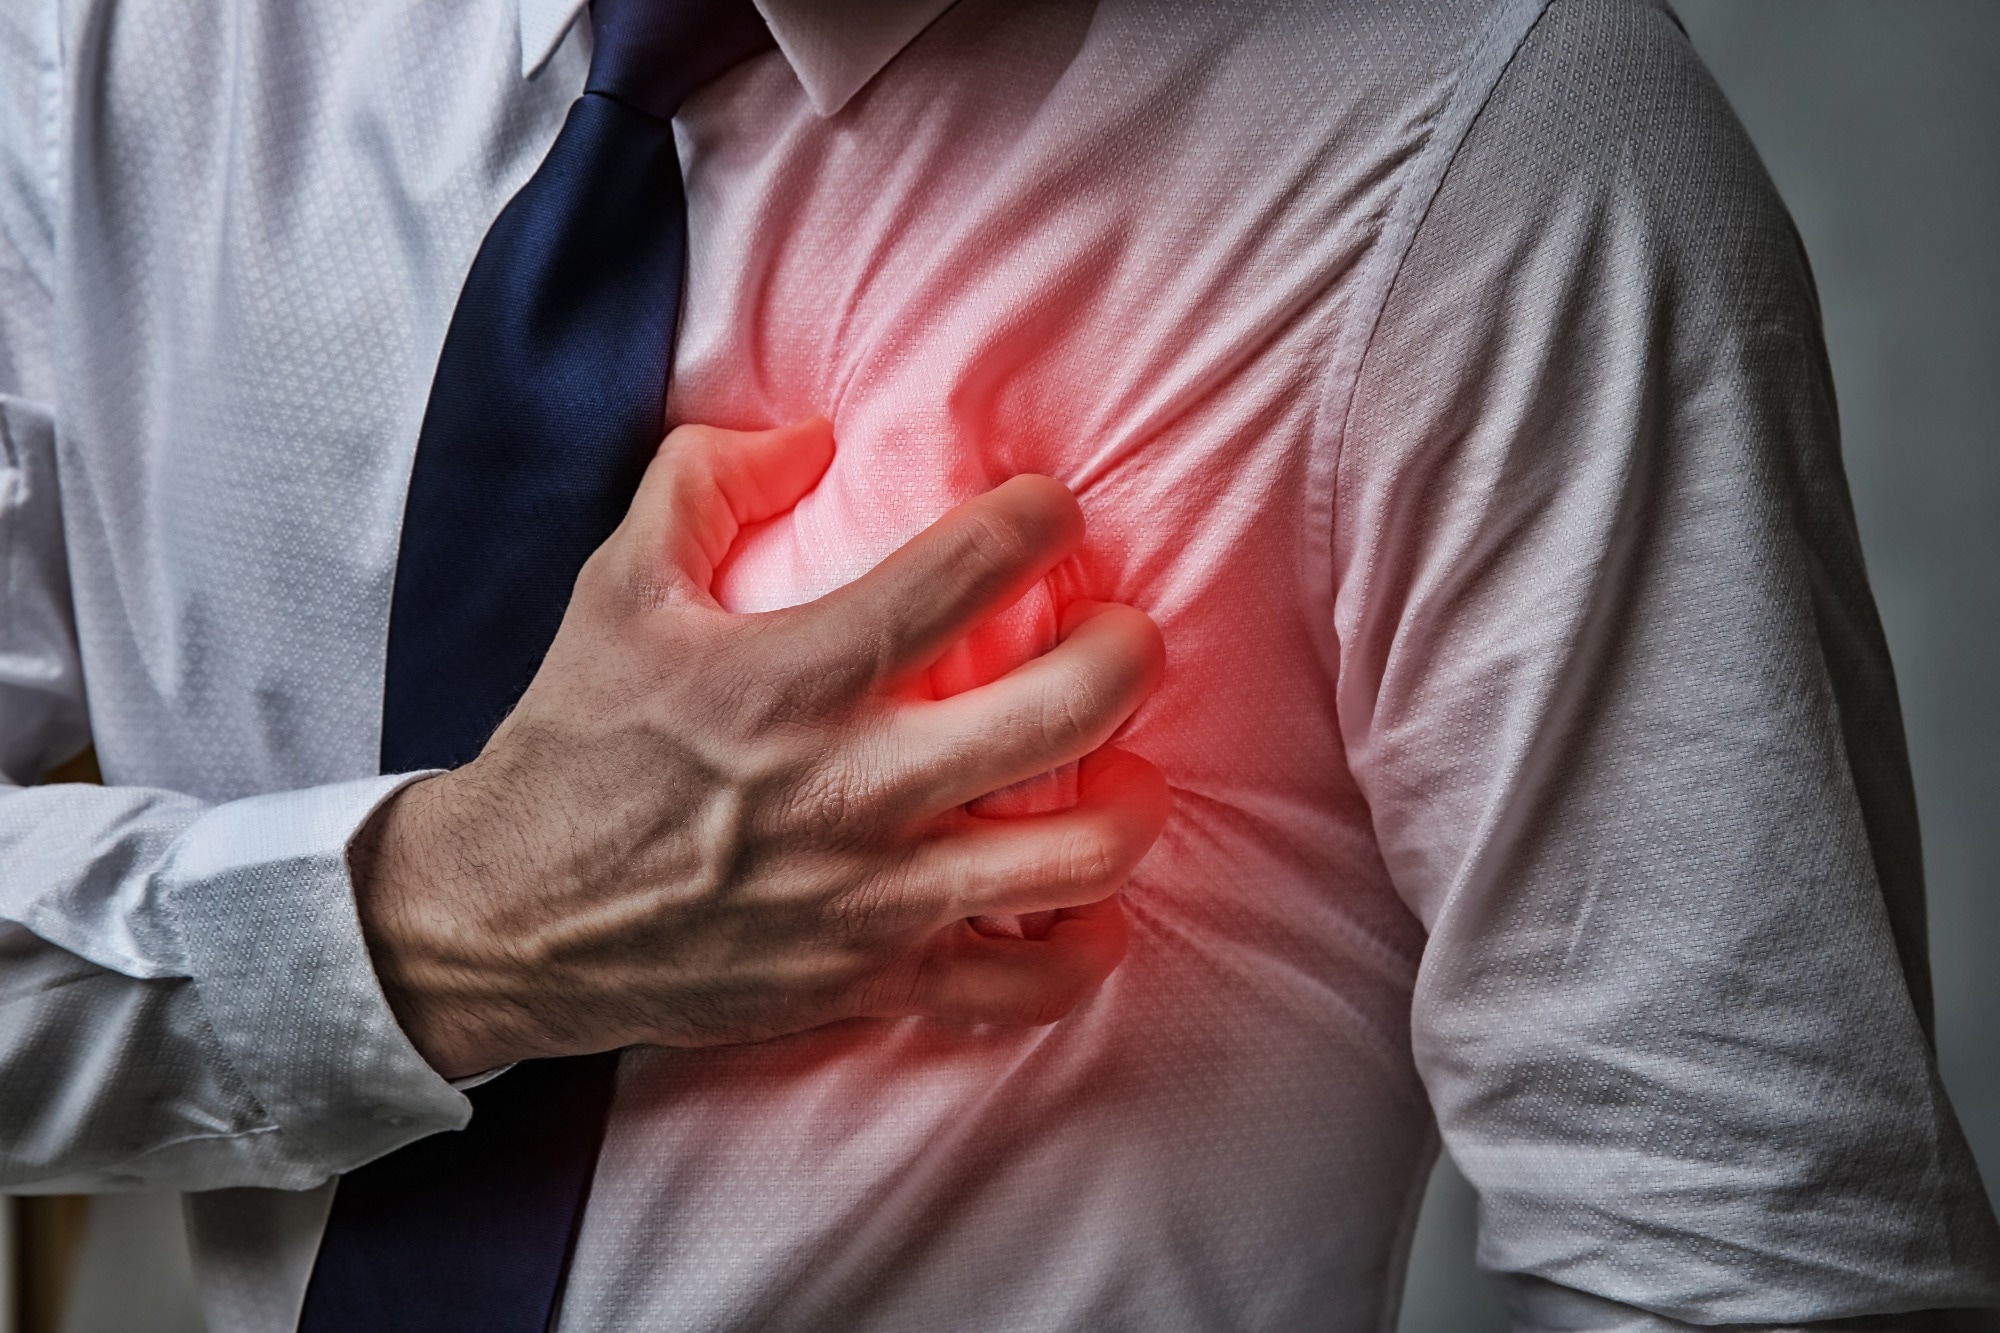 Letter: Markers of imminent myocardial infarction. Image Credit: Africa Studio / Shutterstock